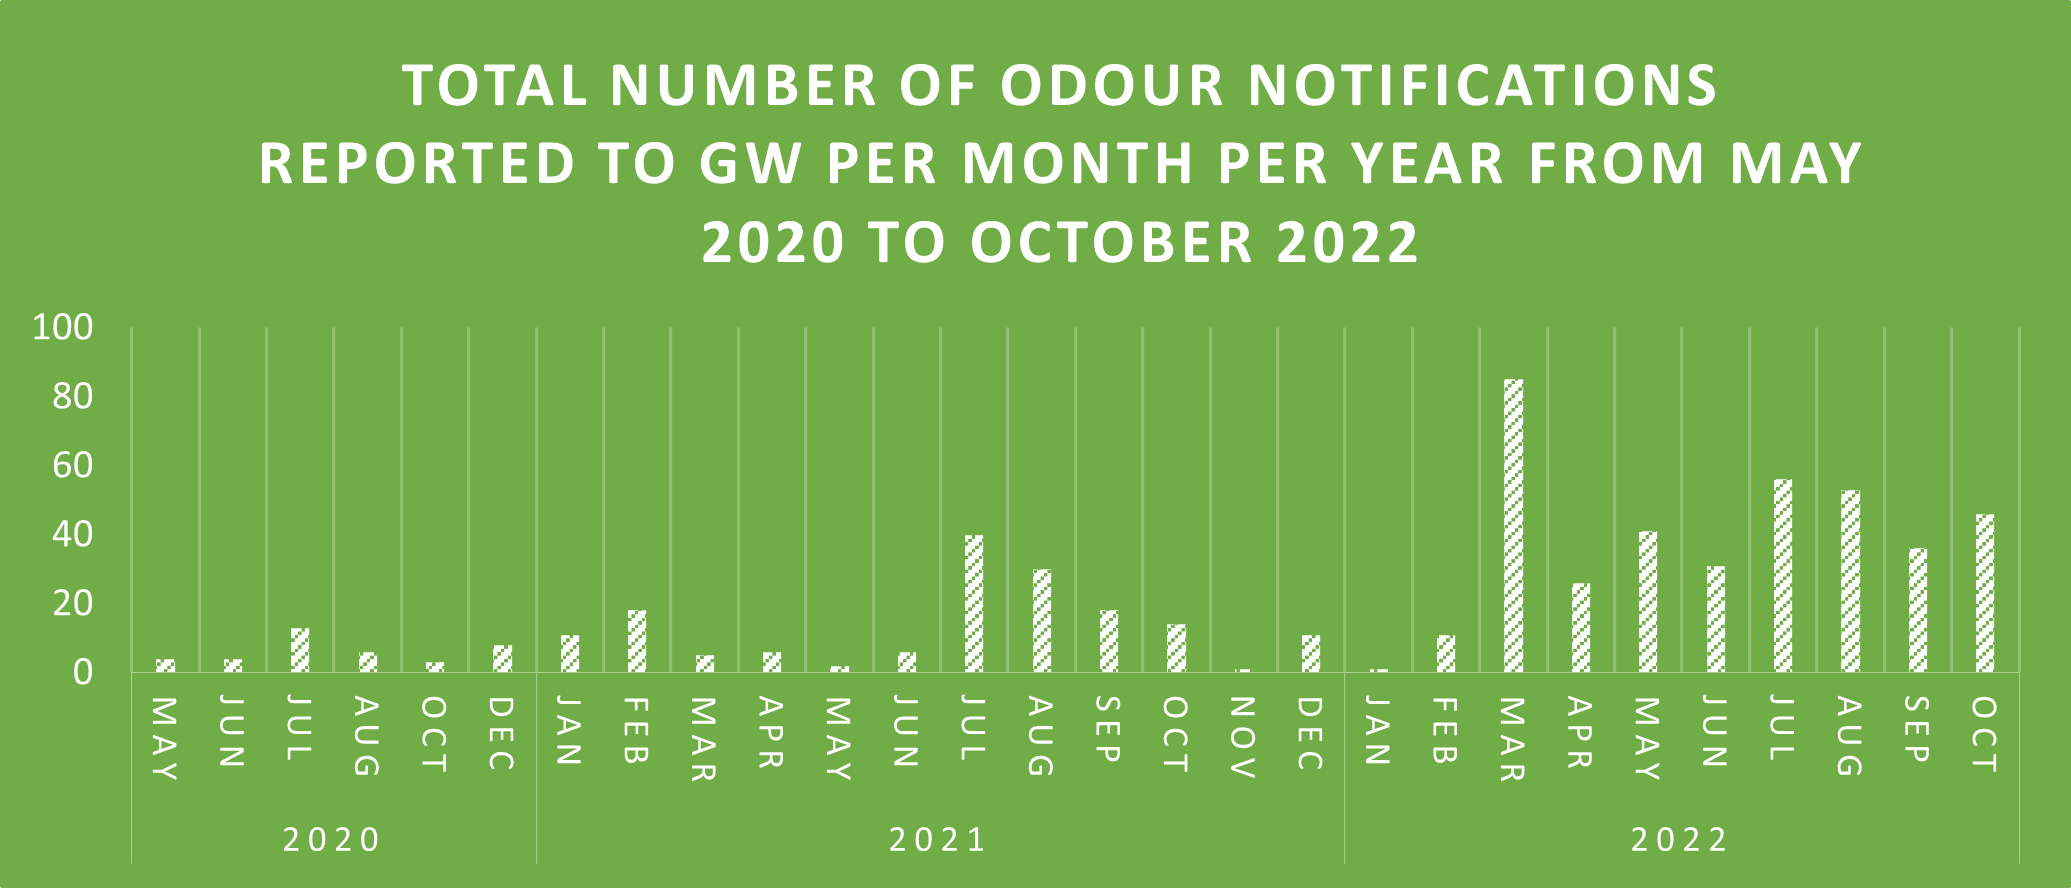 Graph showing total number of odour notifications reported to GW from May 2020 to Oct 2022